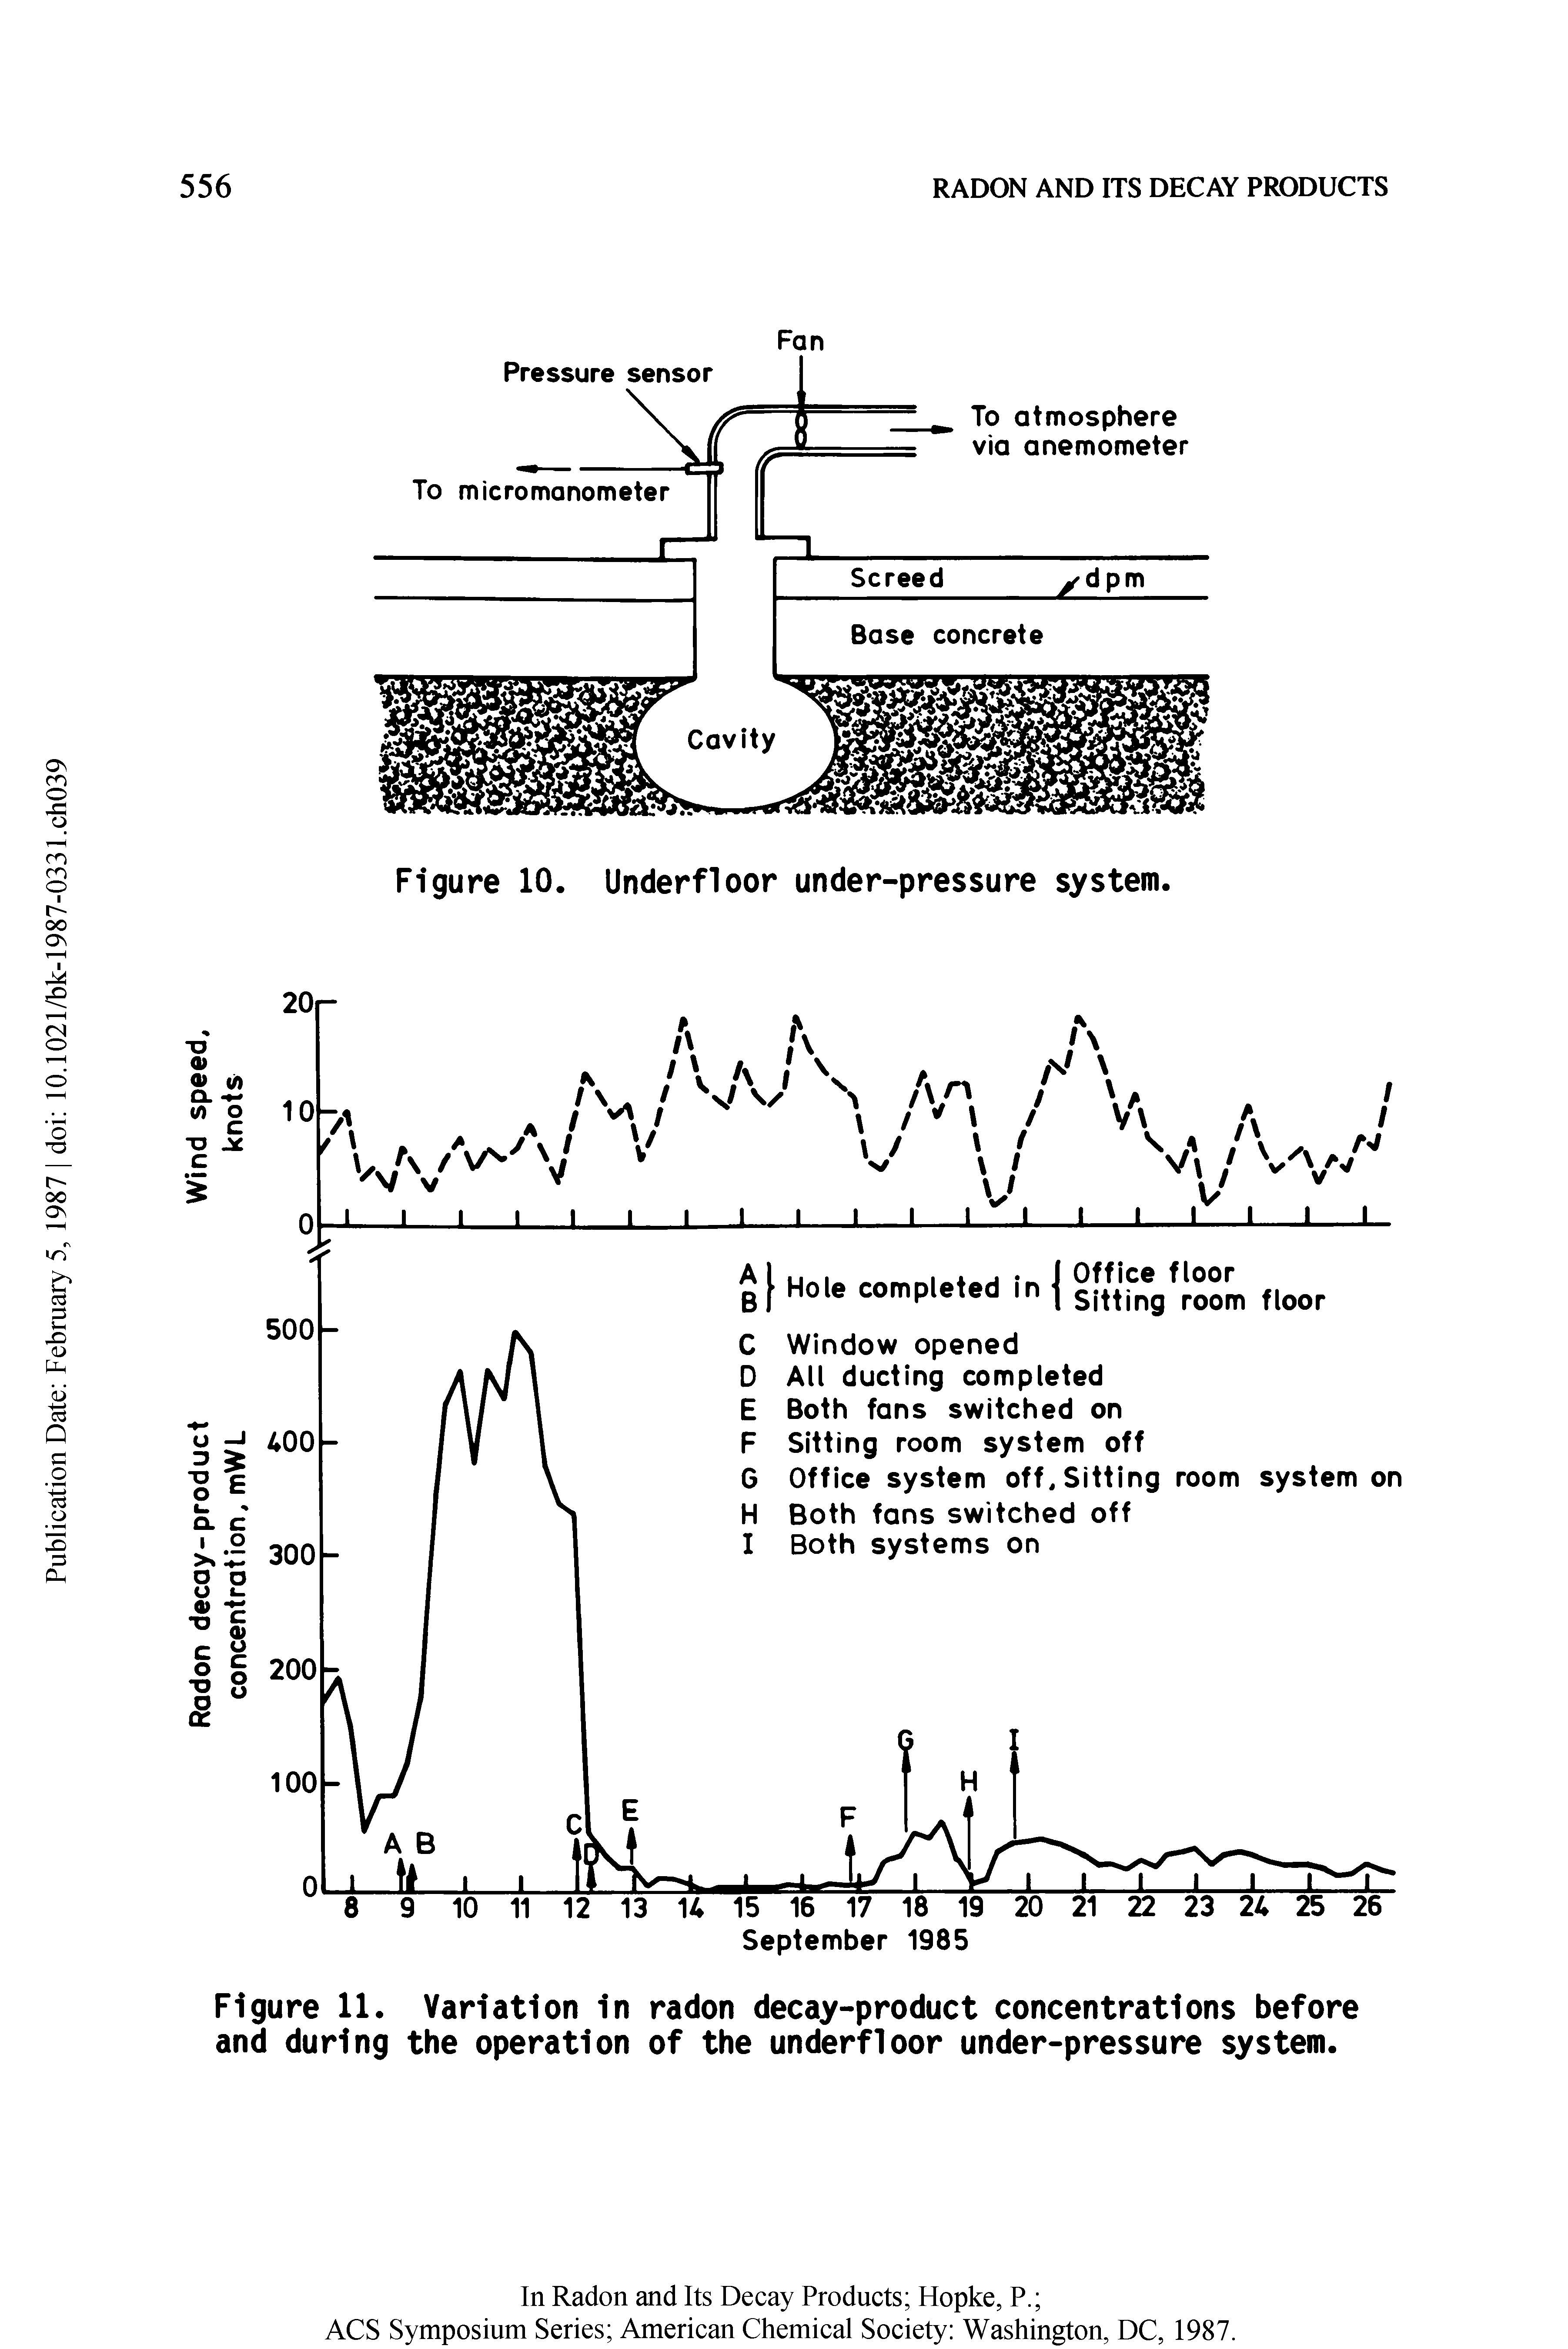 Figure 11. Variation in radon decay-product concentrations before and during the operation of the underfloor under-pressure system.